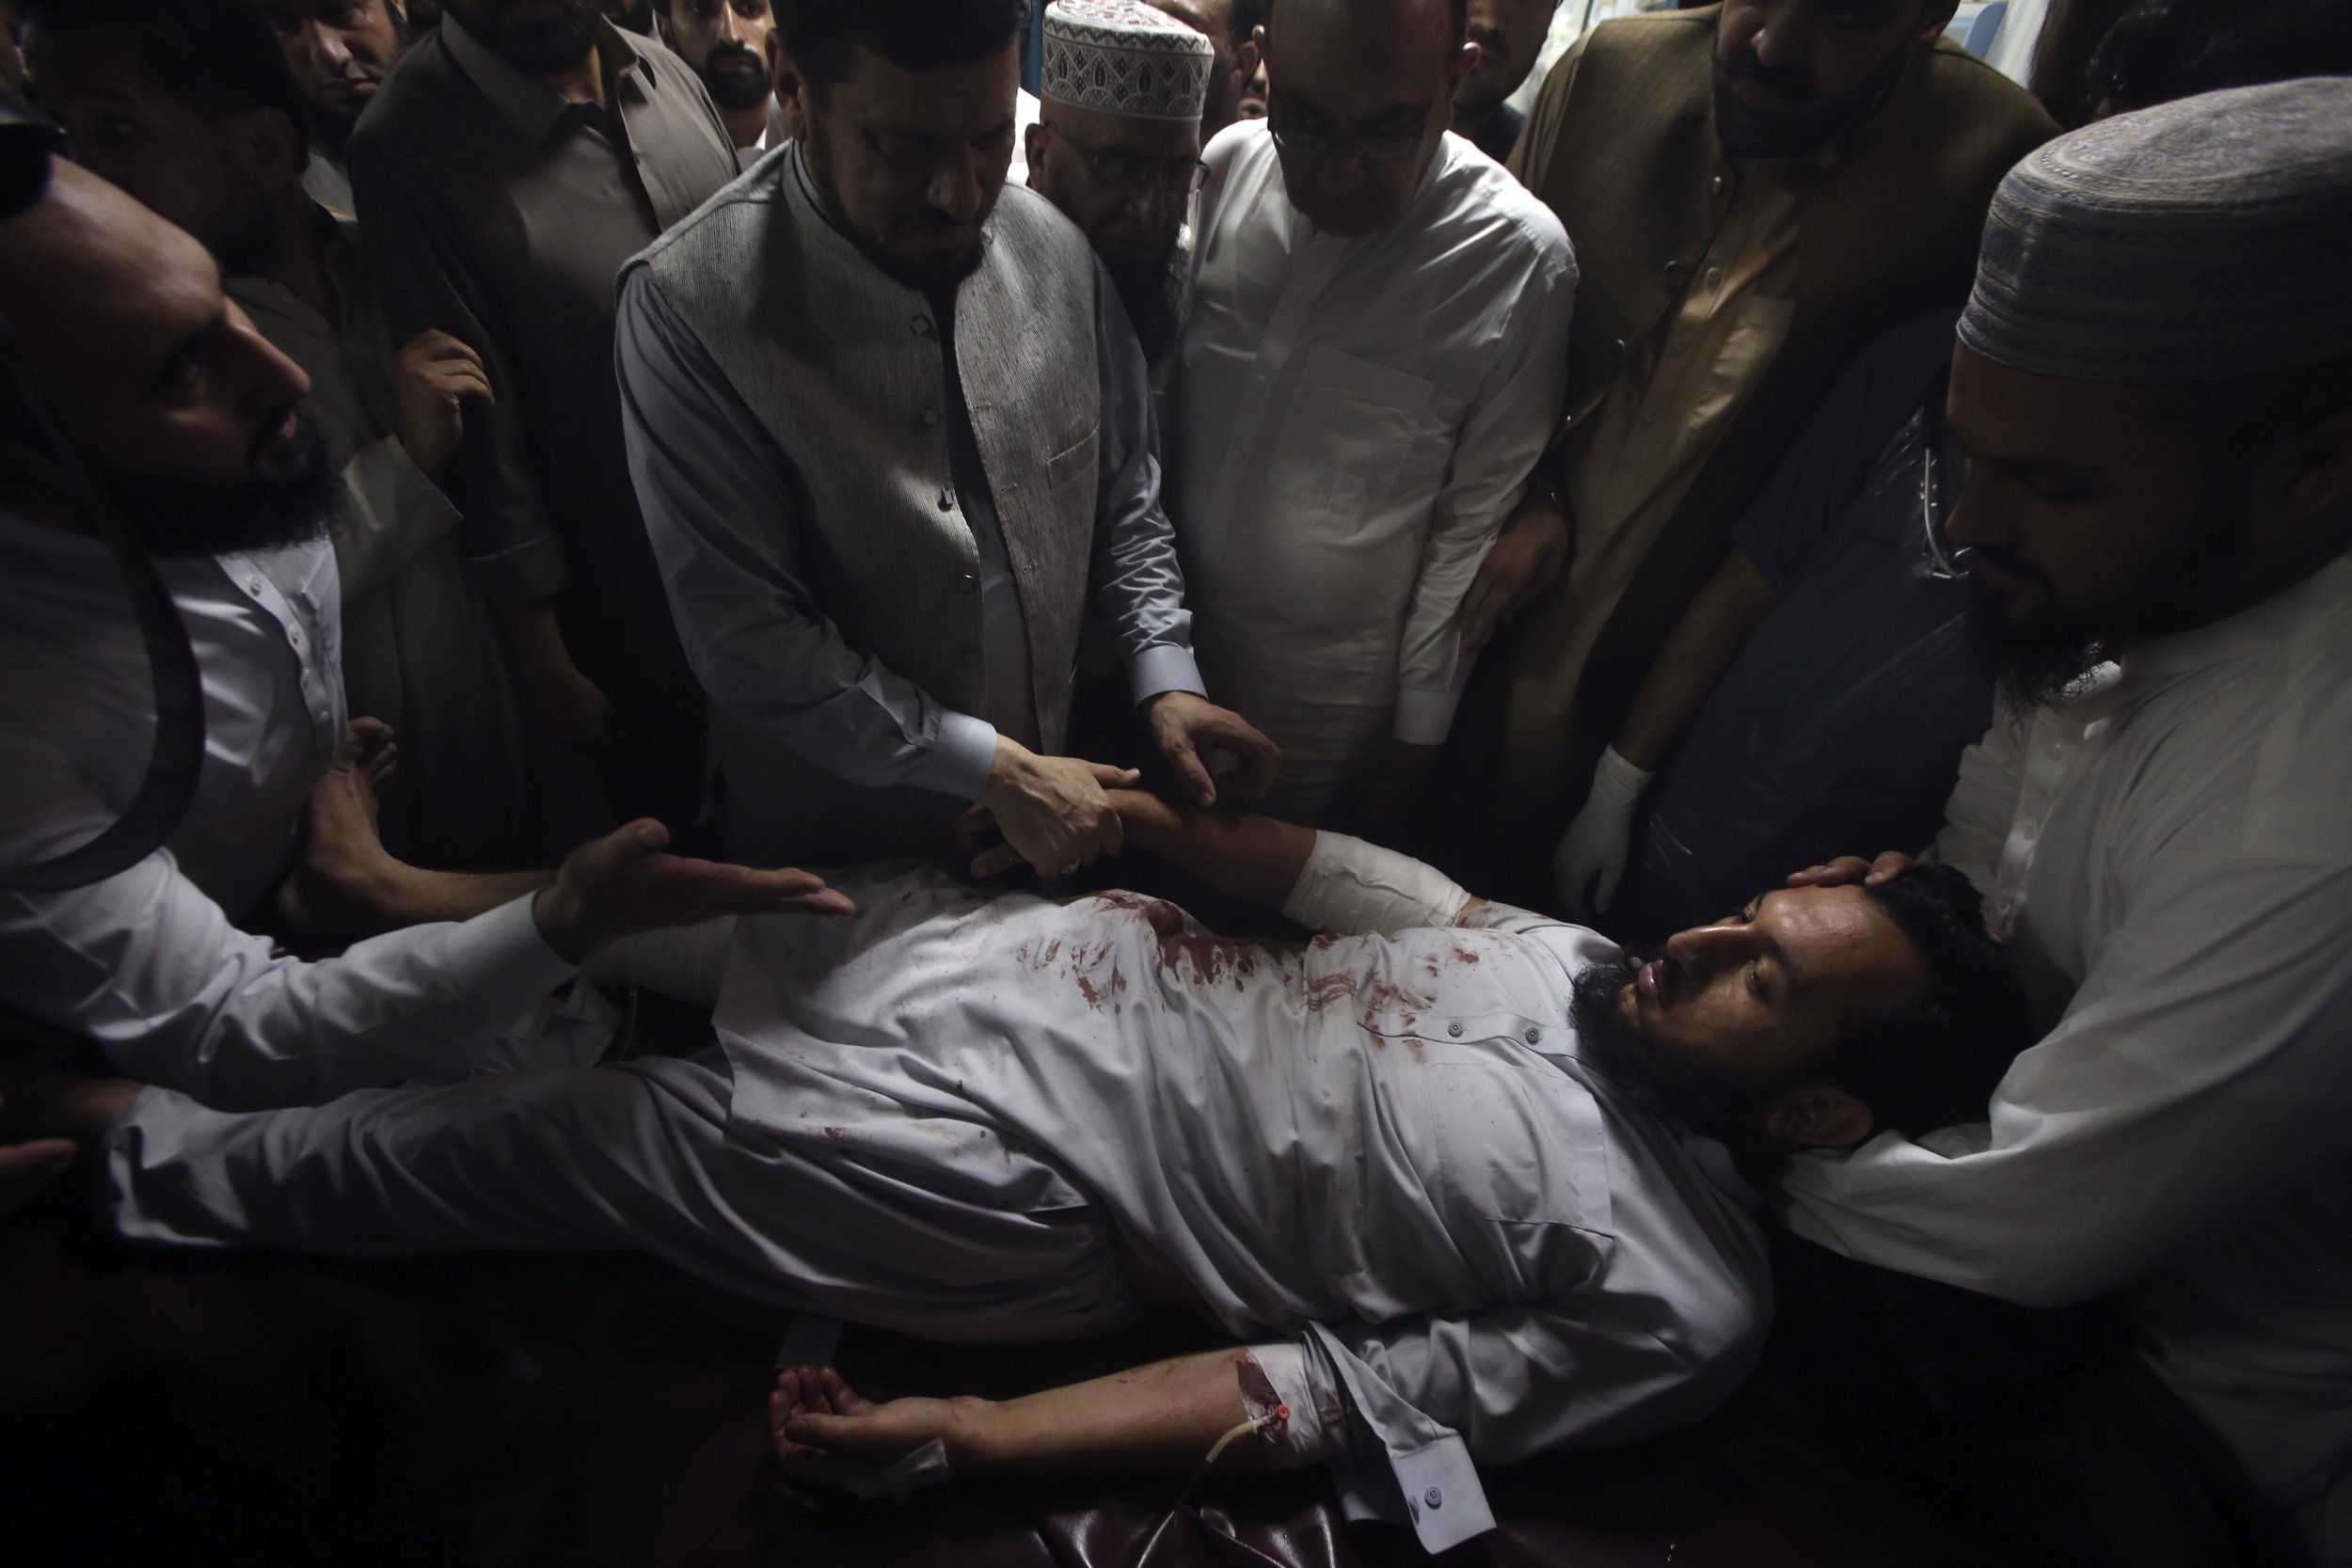  Relatives of an injured victim of a powerful bomb stand around his bed at a hospital in Peshawar, Pakistan, on July 30, 2023. Earlier that day, the bomb ripped through a rally of supporters of a hard-line cleric and political leader in the country's